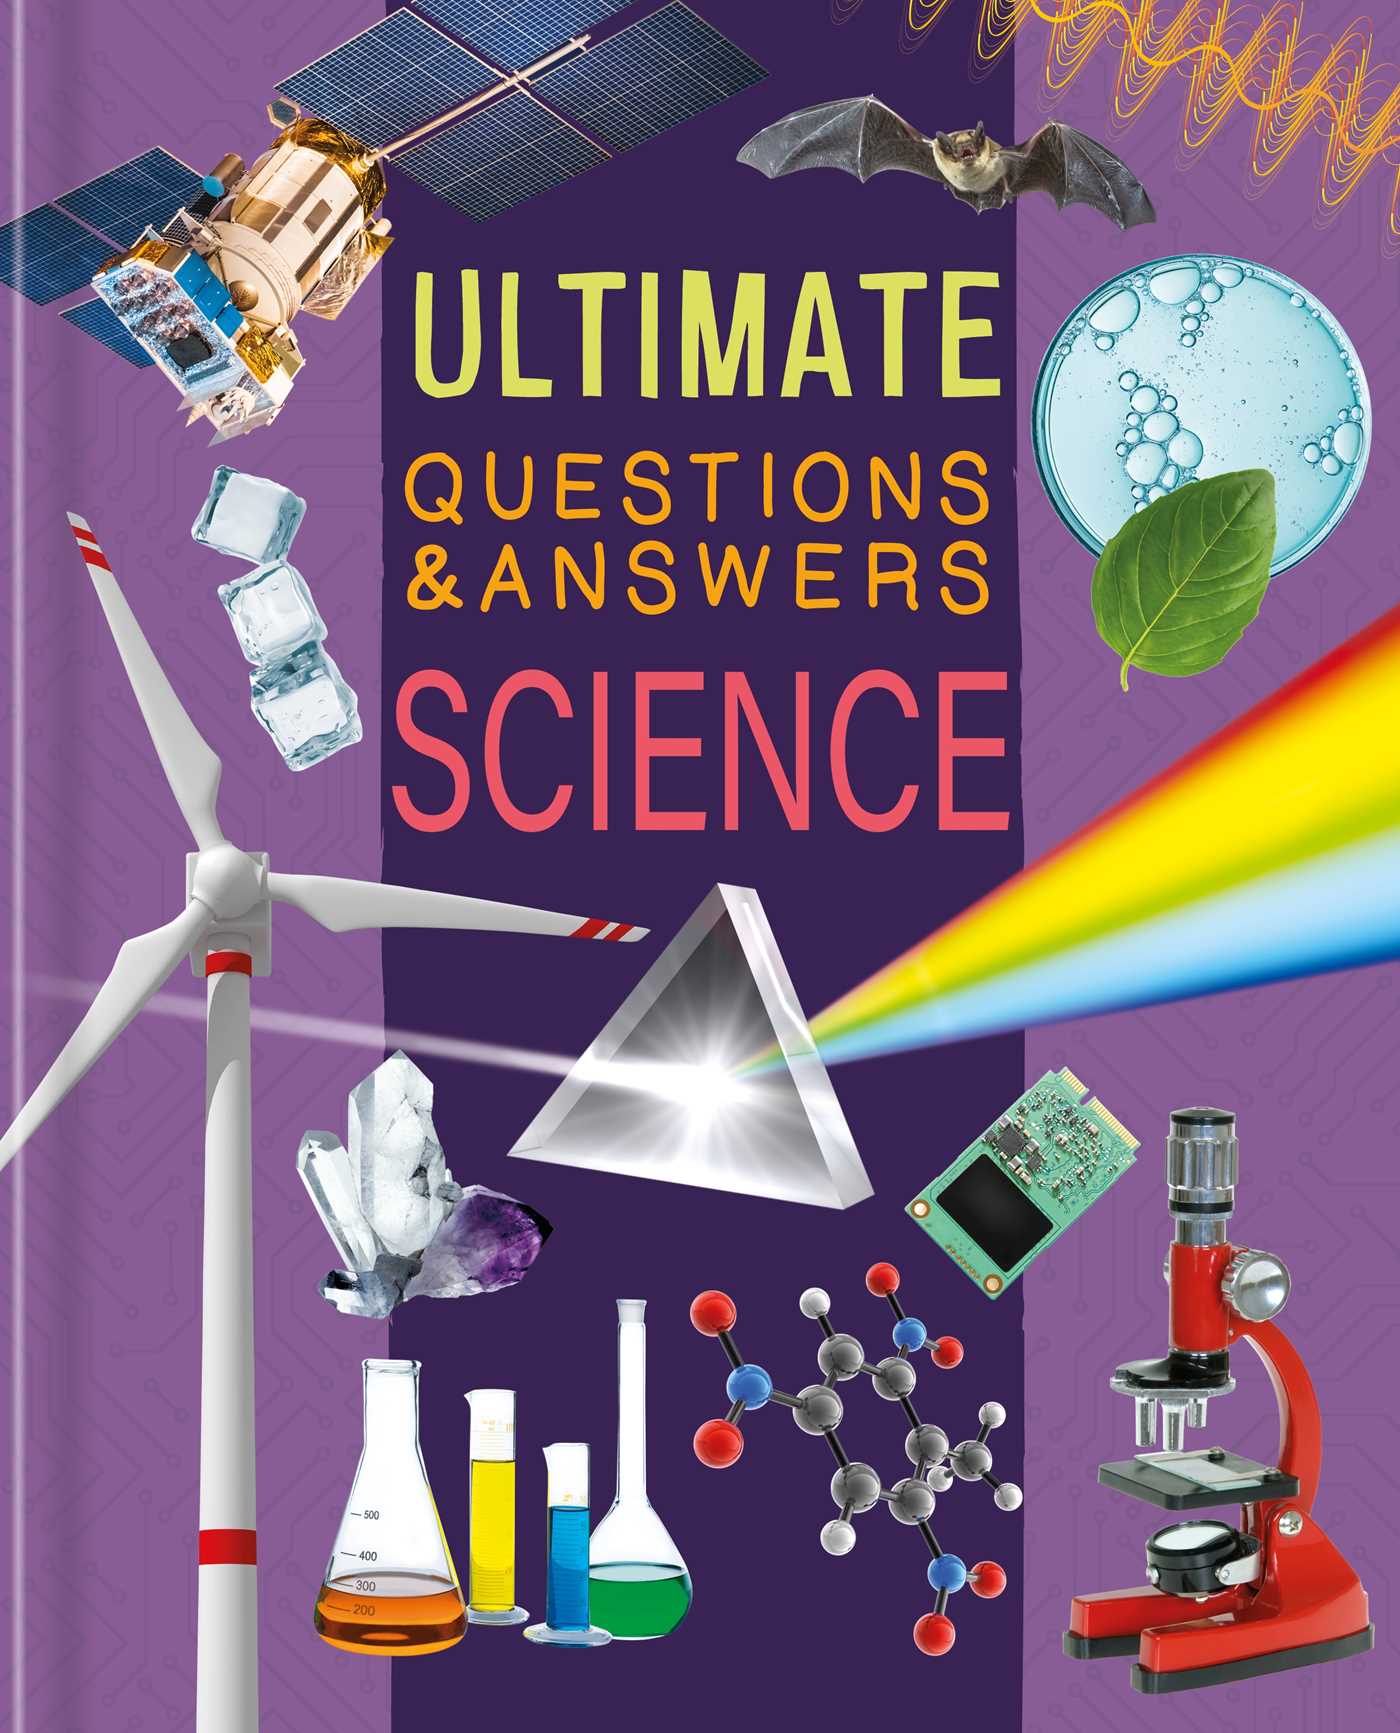 Ultimate Questions & Answers - Science